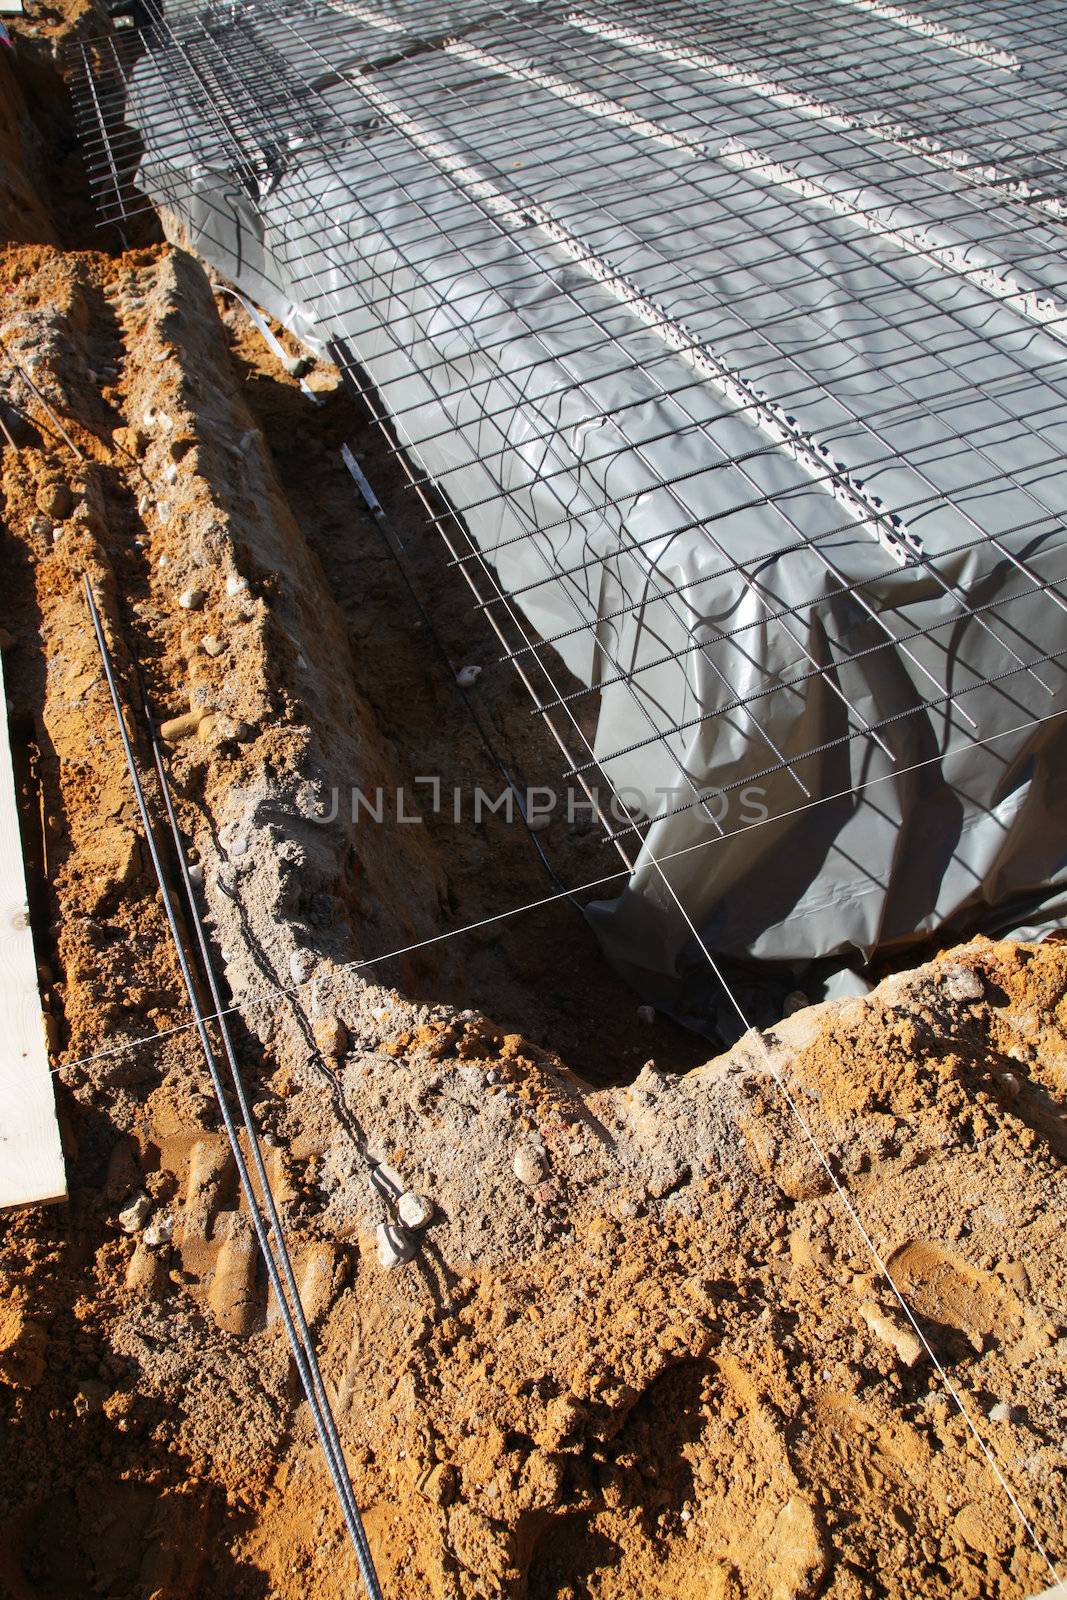 Excavations for the foundations of a new house with the main floor area covered in a sheet of plastic and a mesh of steel reinforcing rods 